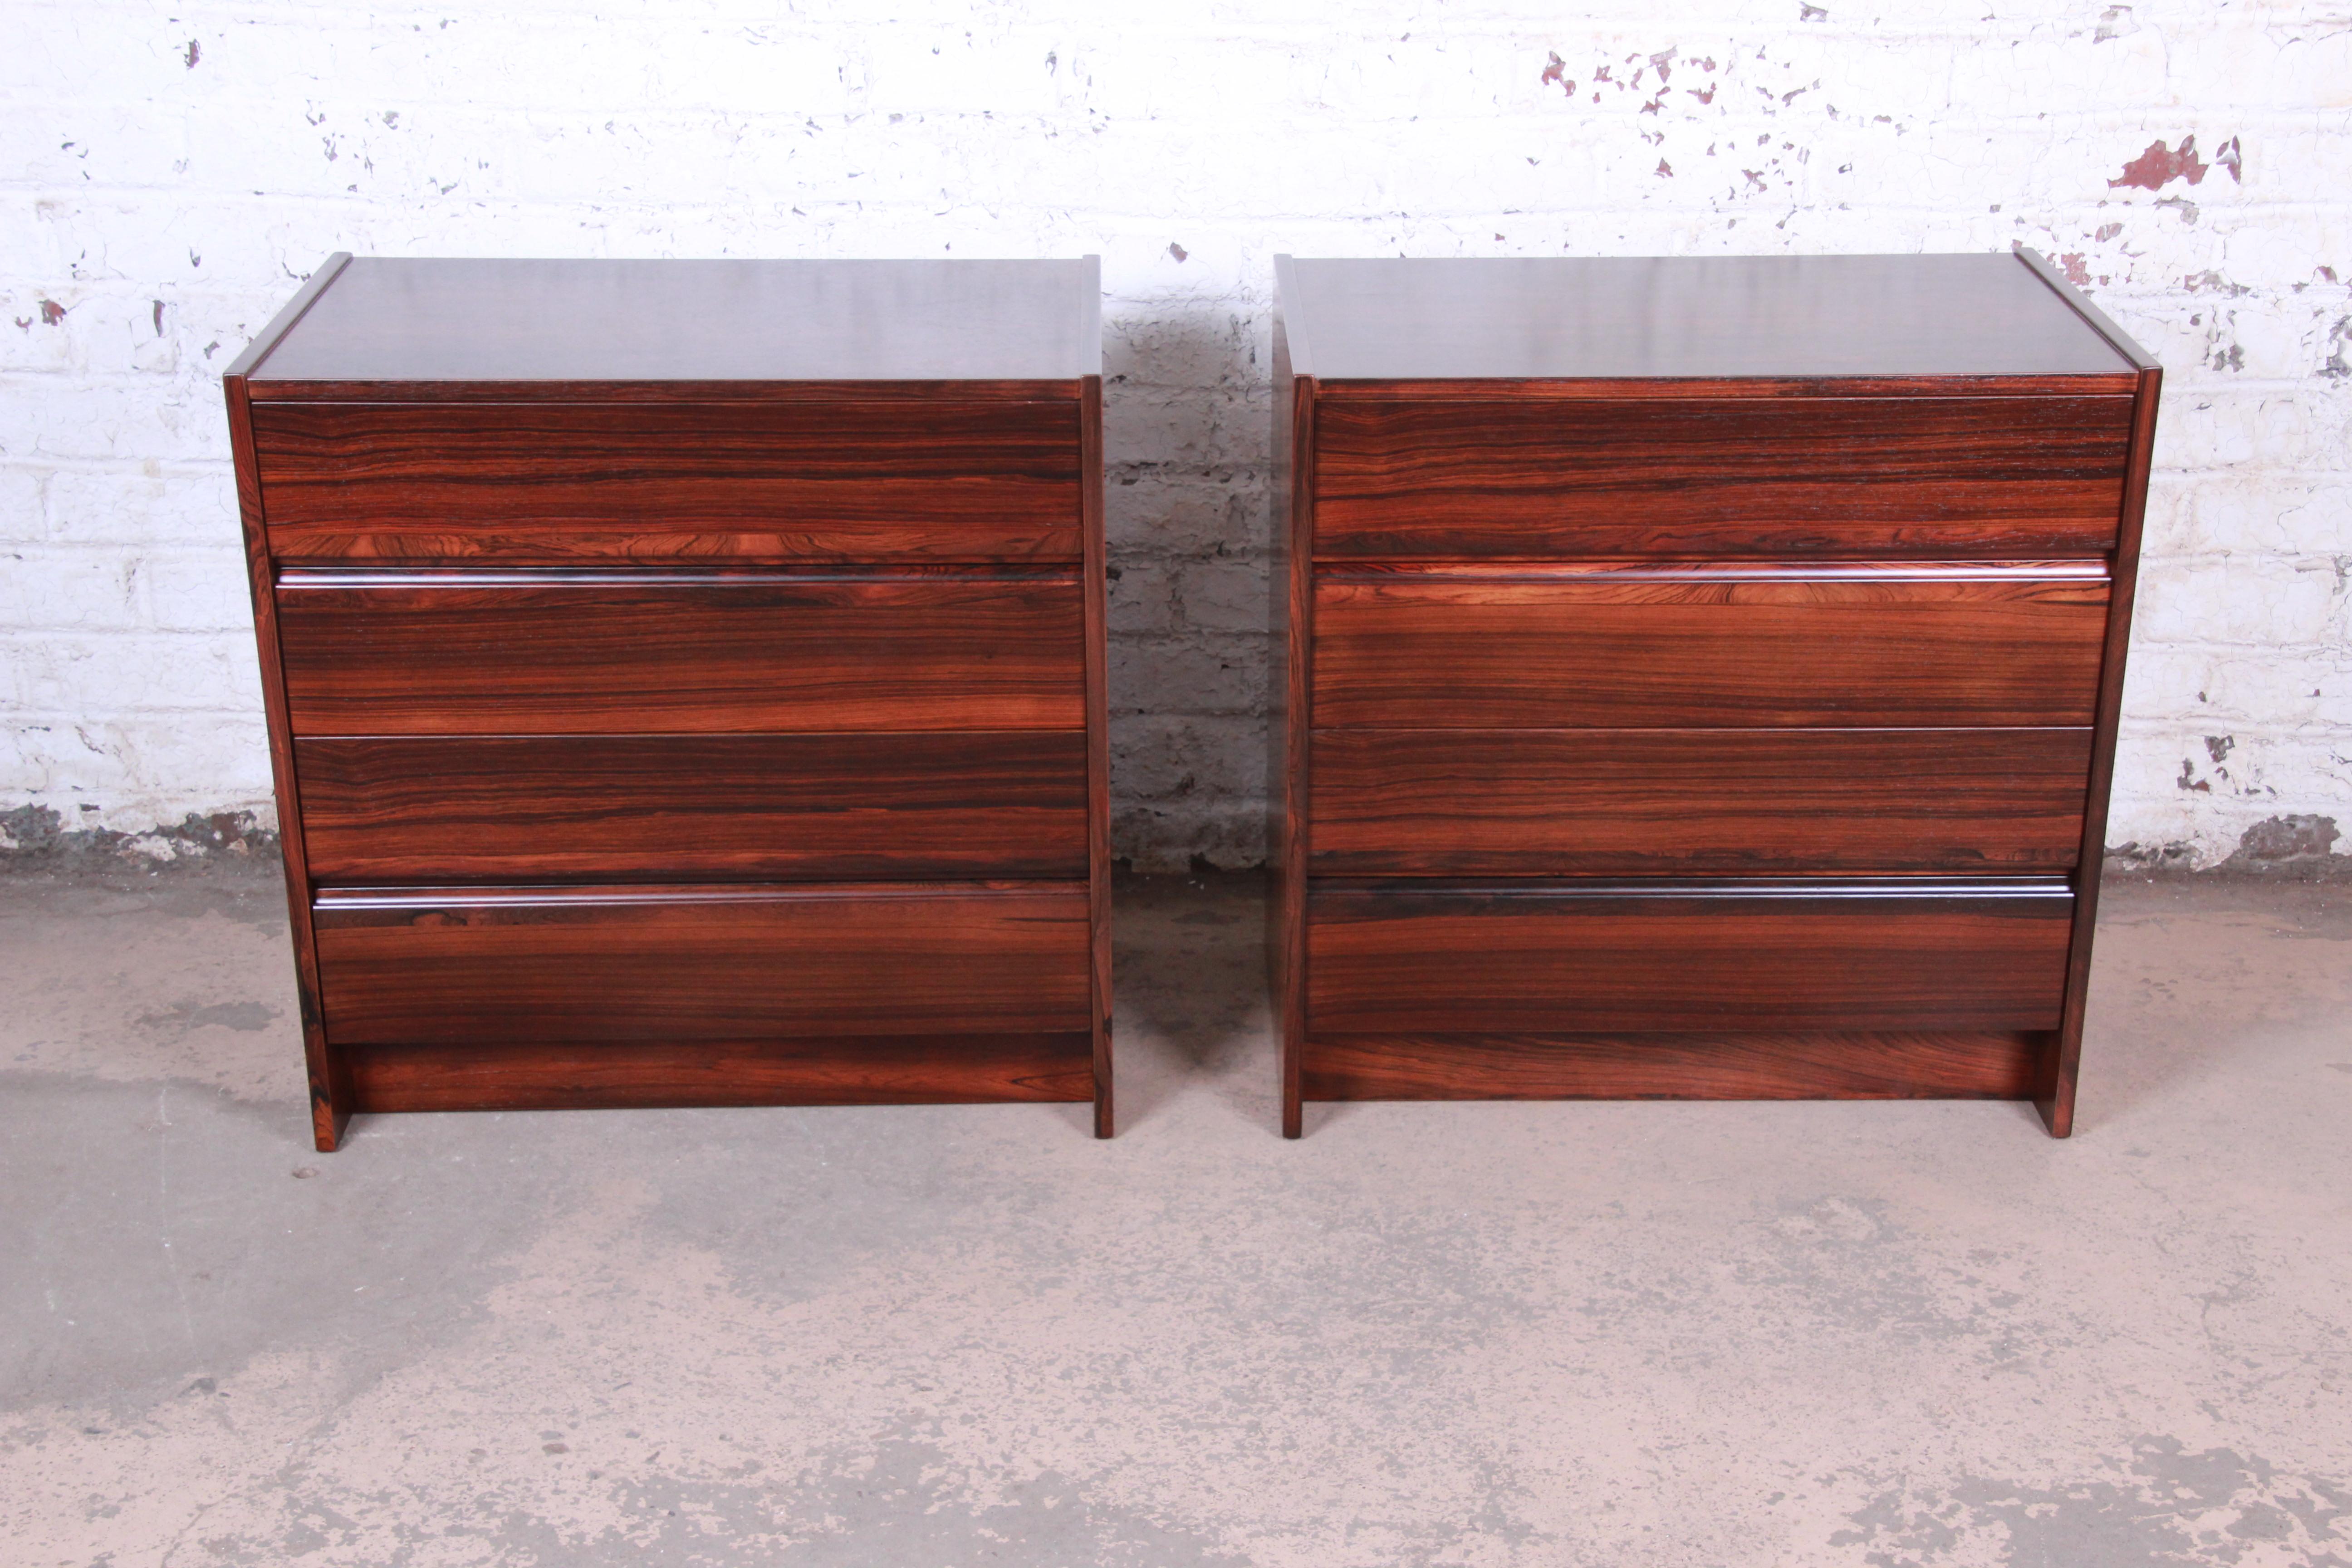 An exceptional pair of midcentury Danish modern dressers or bedside chests in book-matched rosewood

In the manner of Hans Wegner

Denmark, 1960s

Measures: 30.63